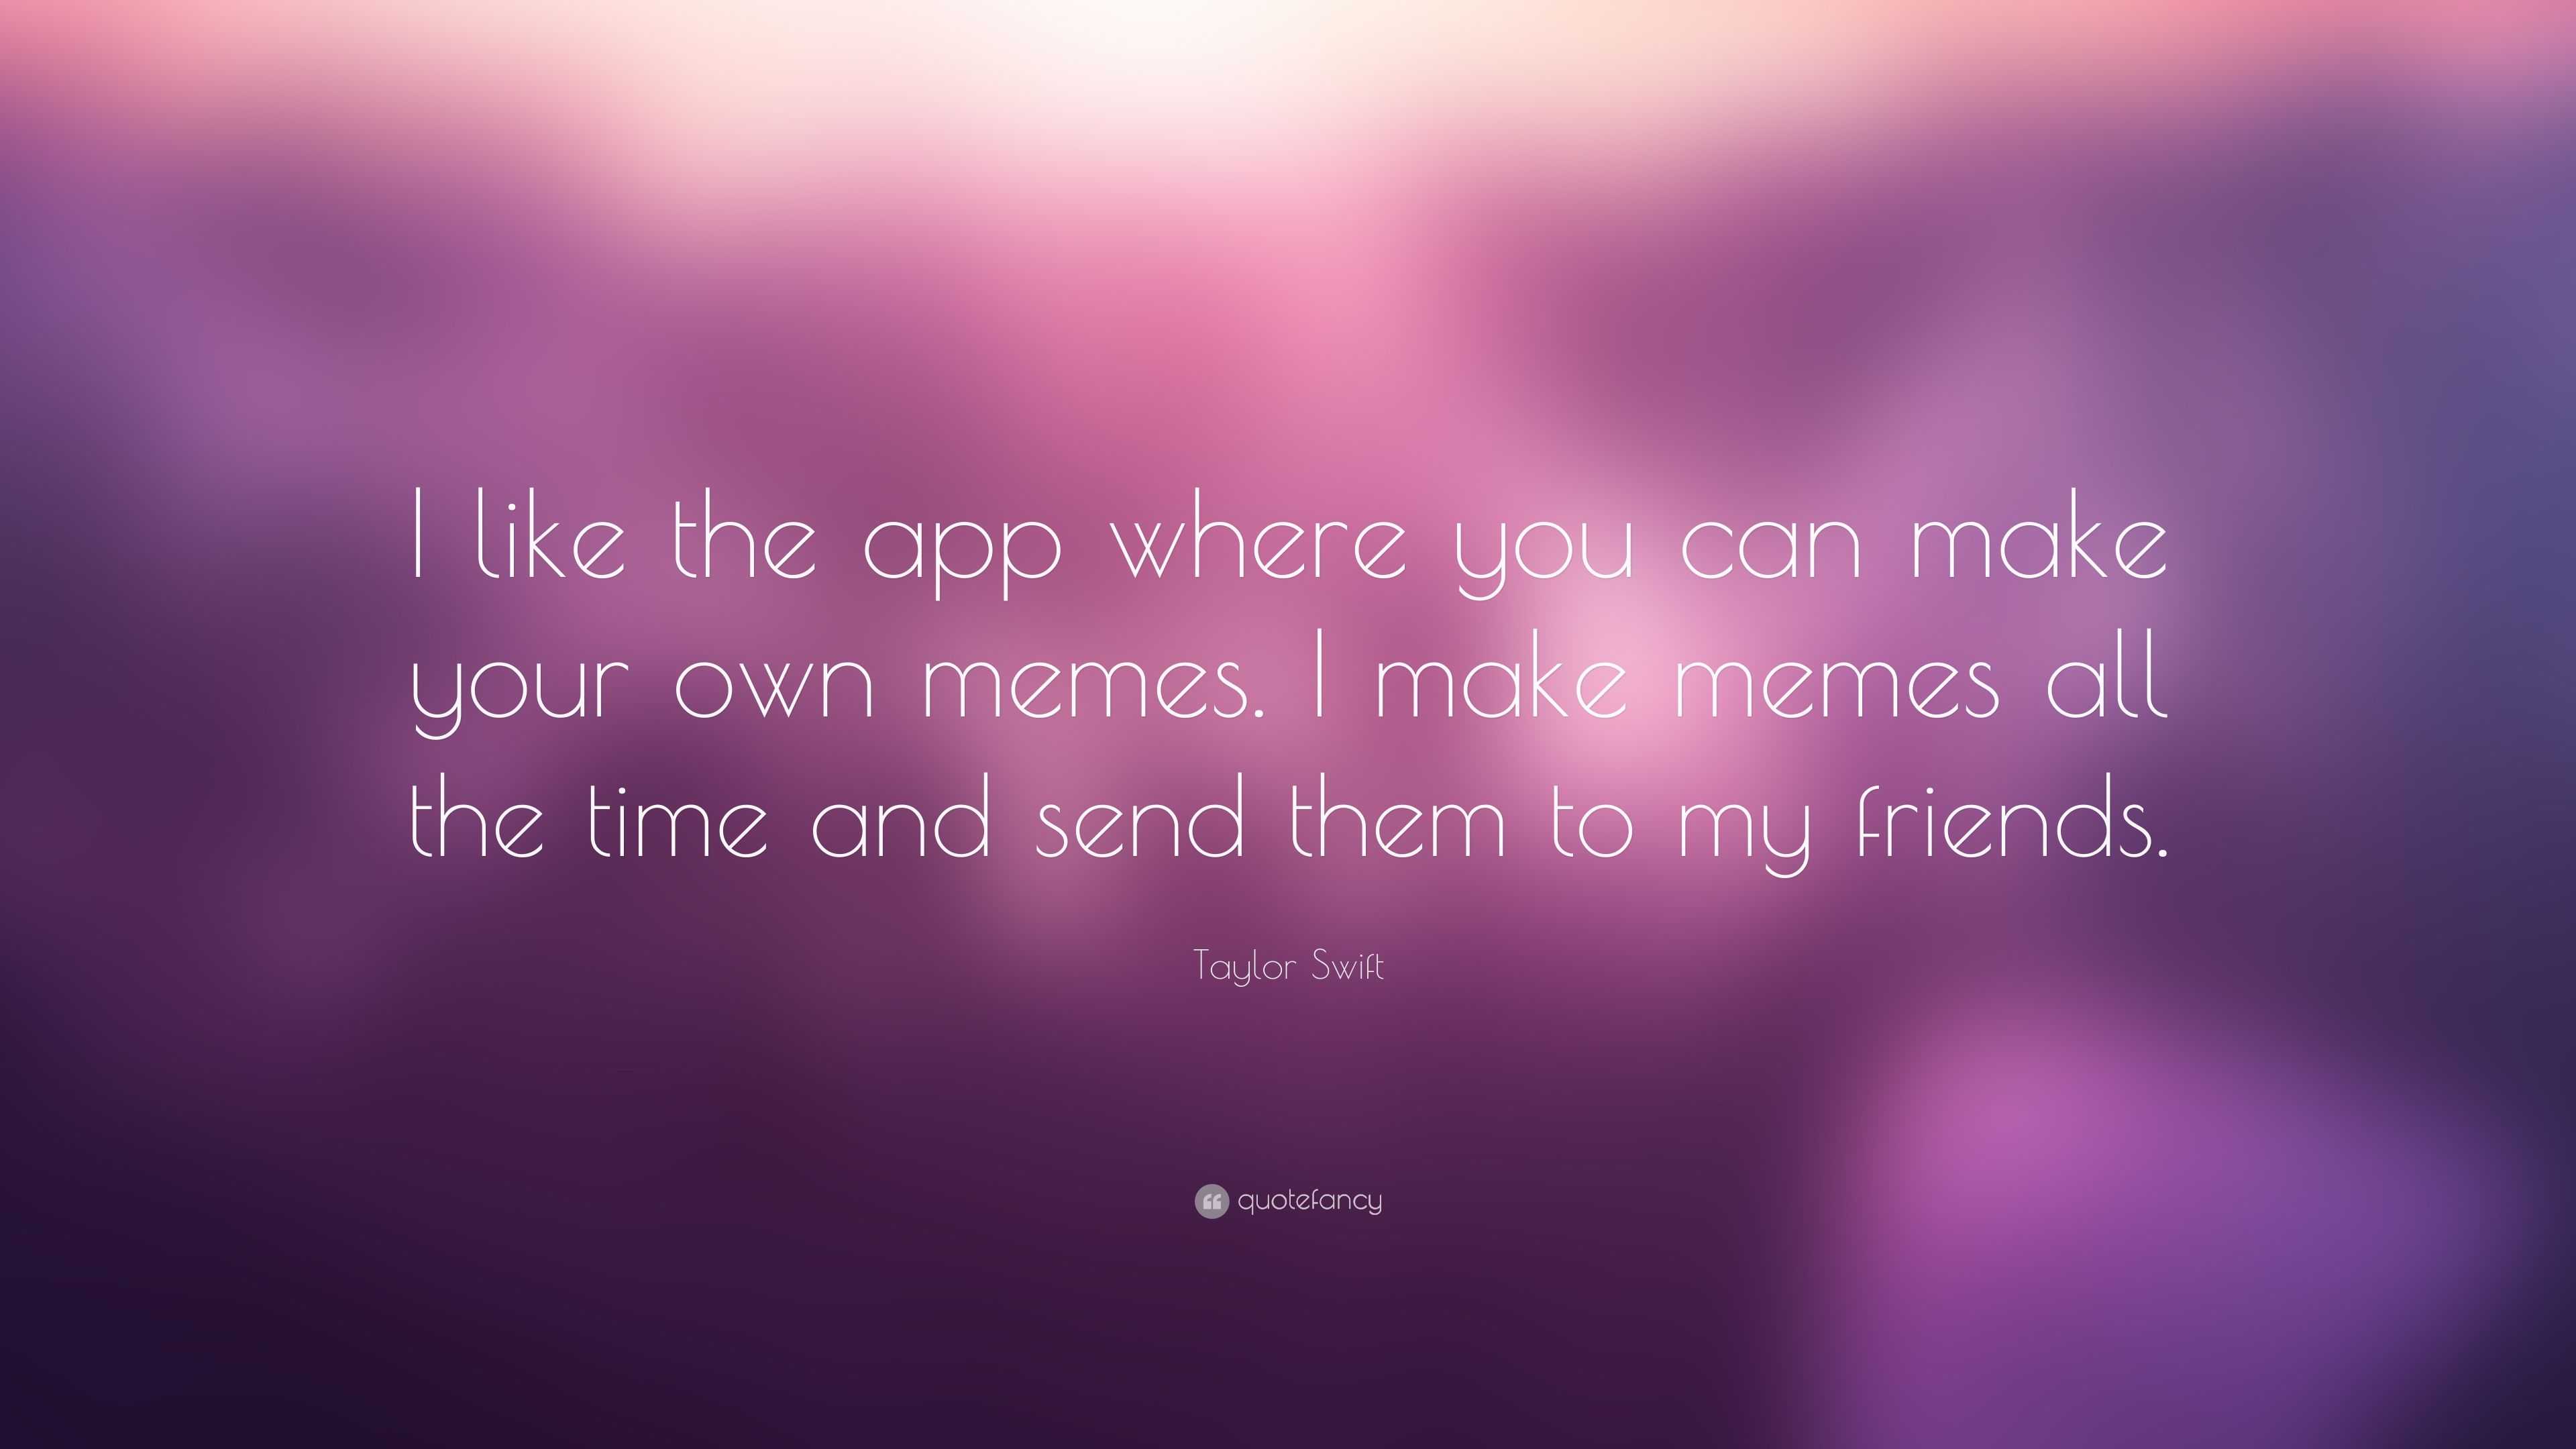 Taylor Swift Quote: “I like the app where you can make your own memes. I  make